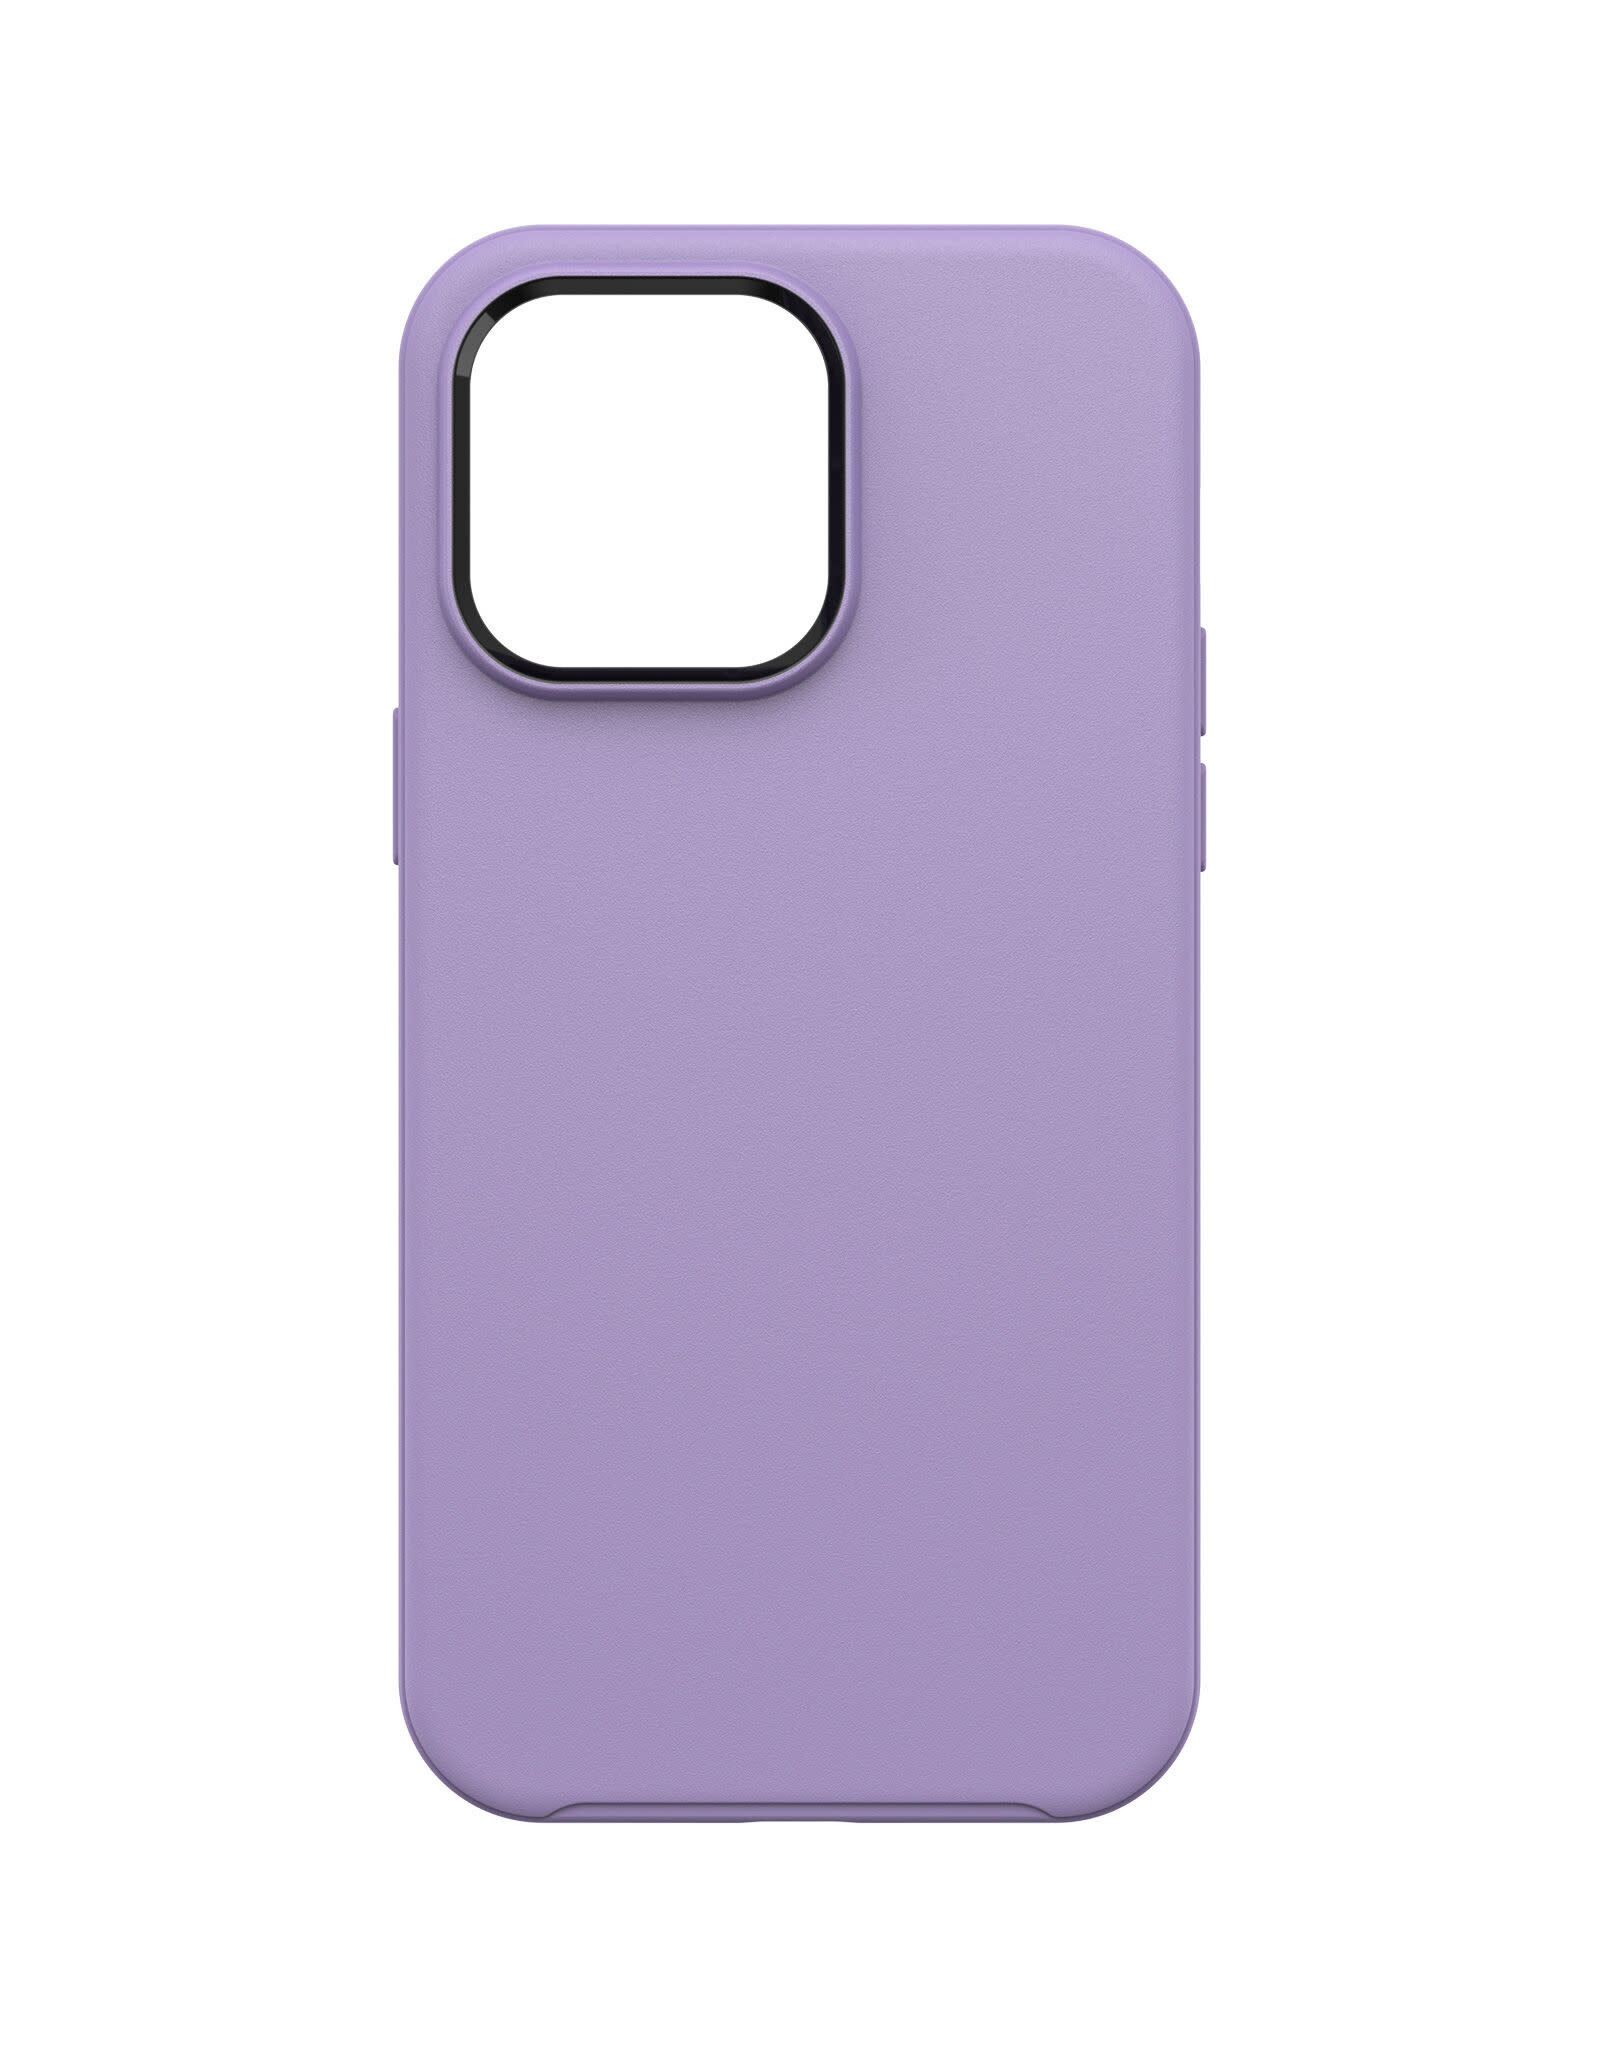 Otterbox Otterbox Symmetry Case You Lilac It suits iPhone 14 Pro Max